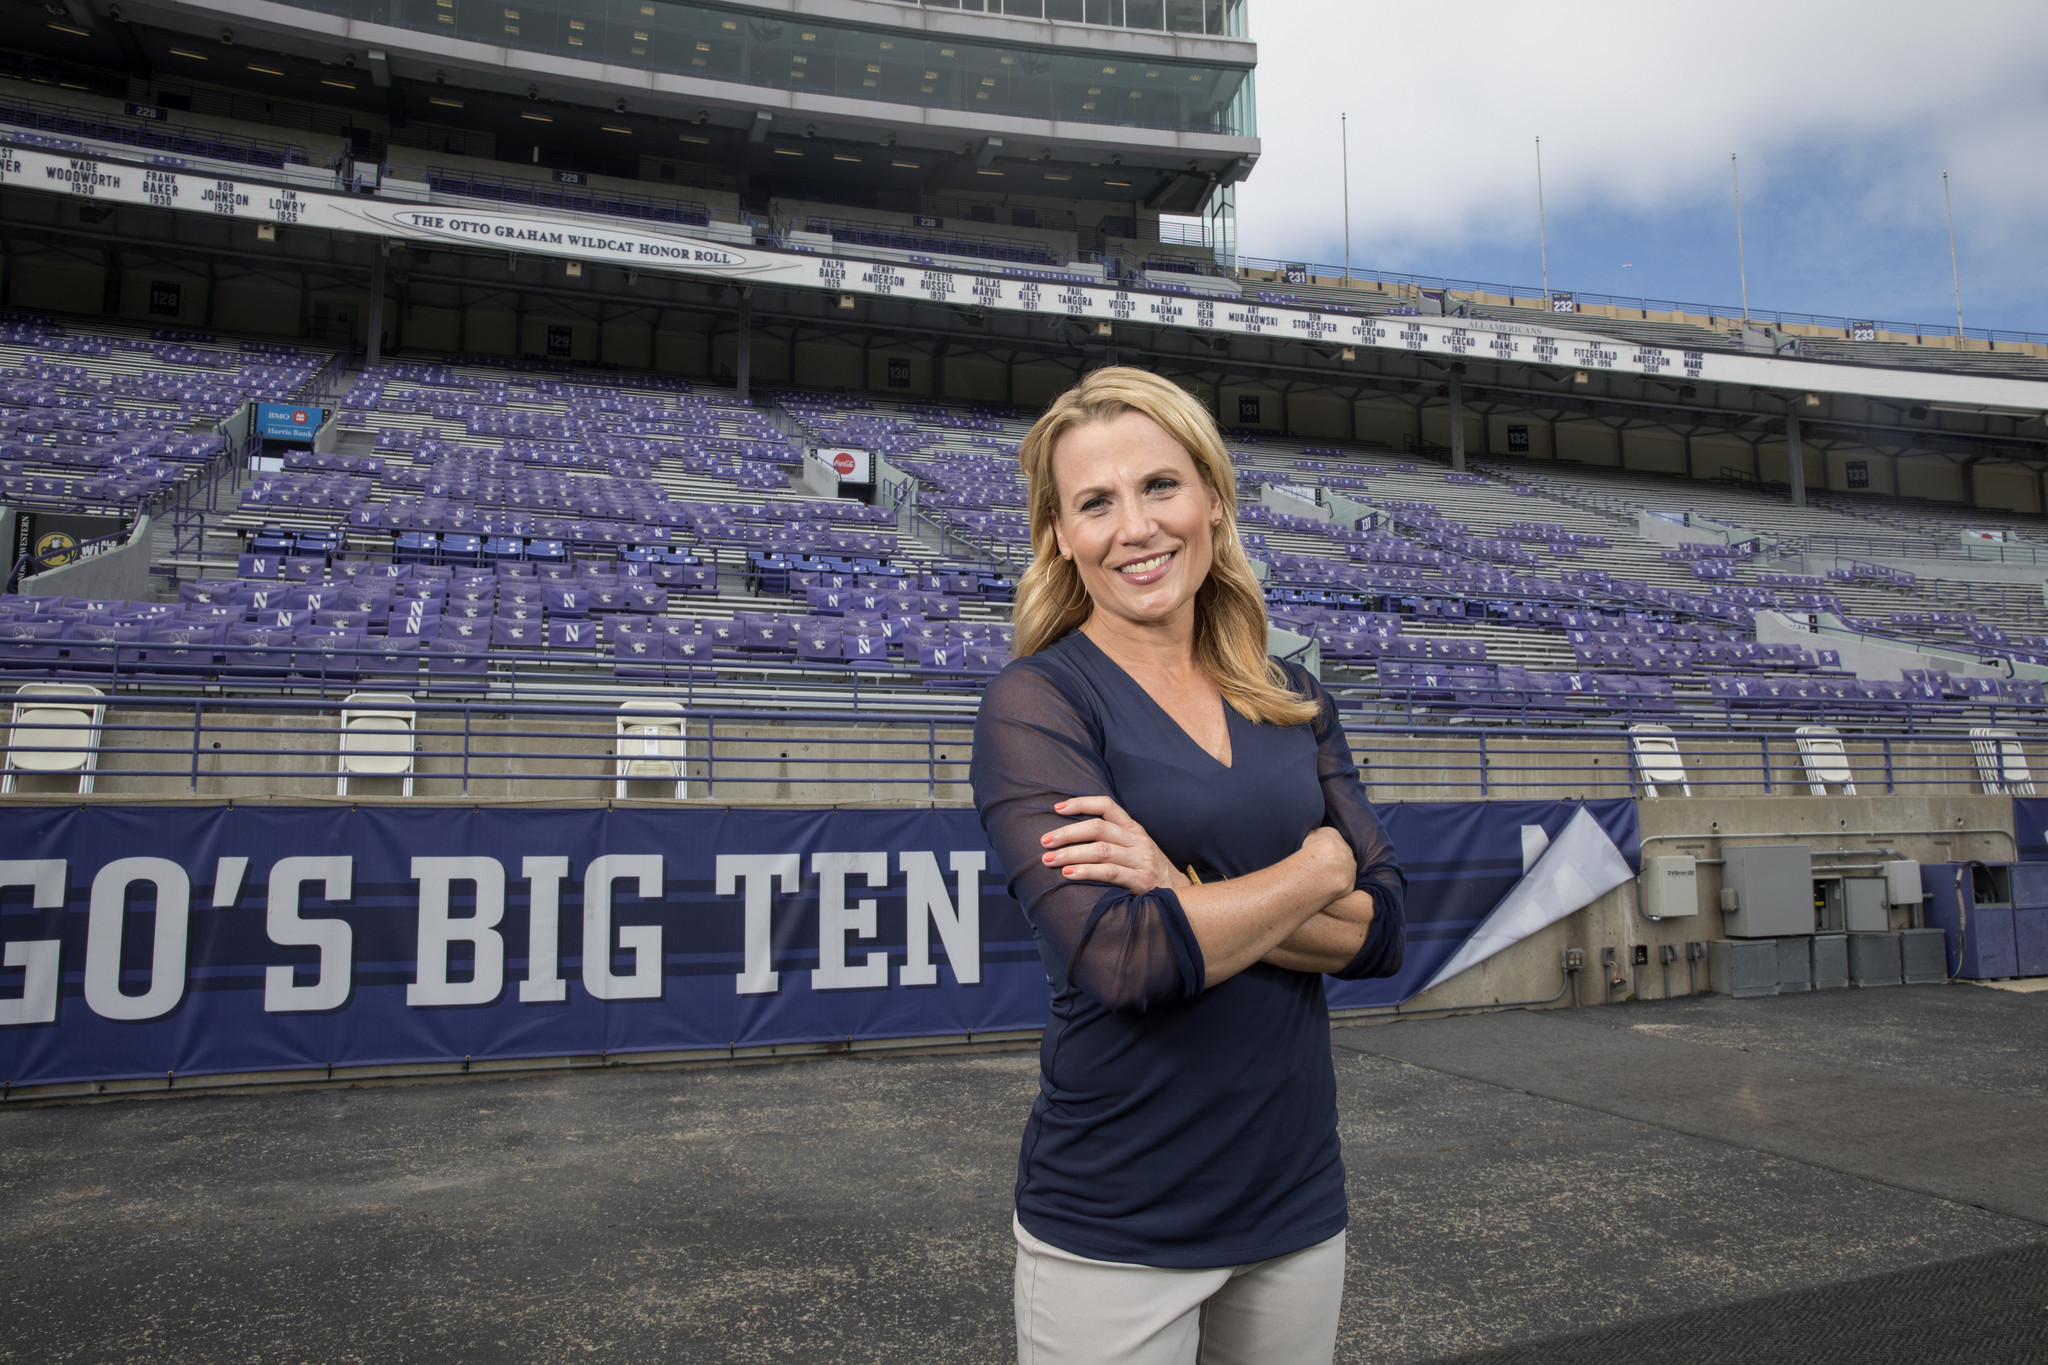 BTN broadcaster Lisa Byington braces for historic football assignment